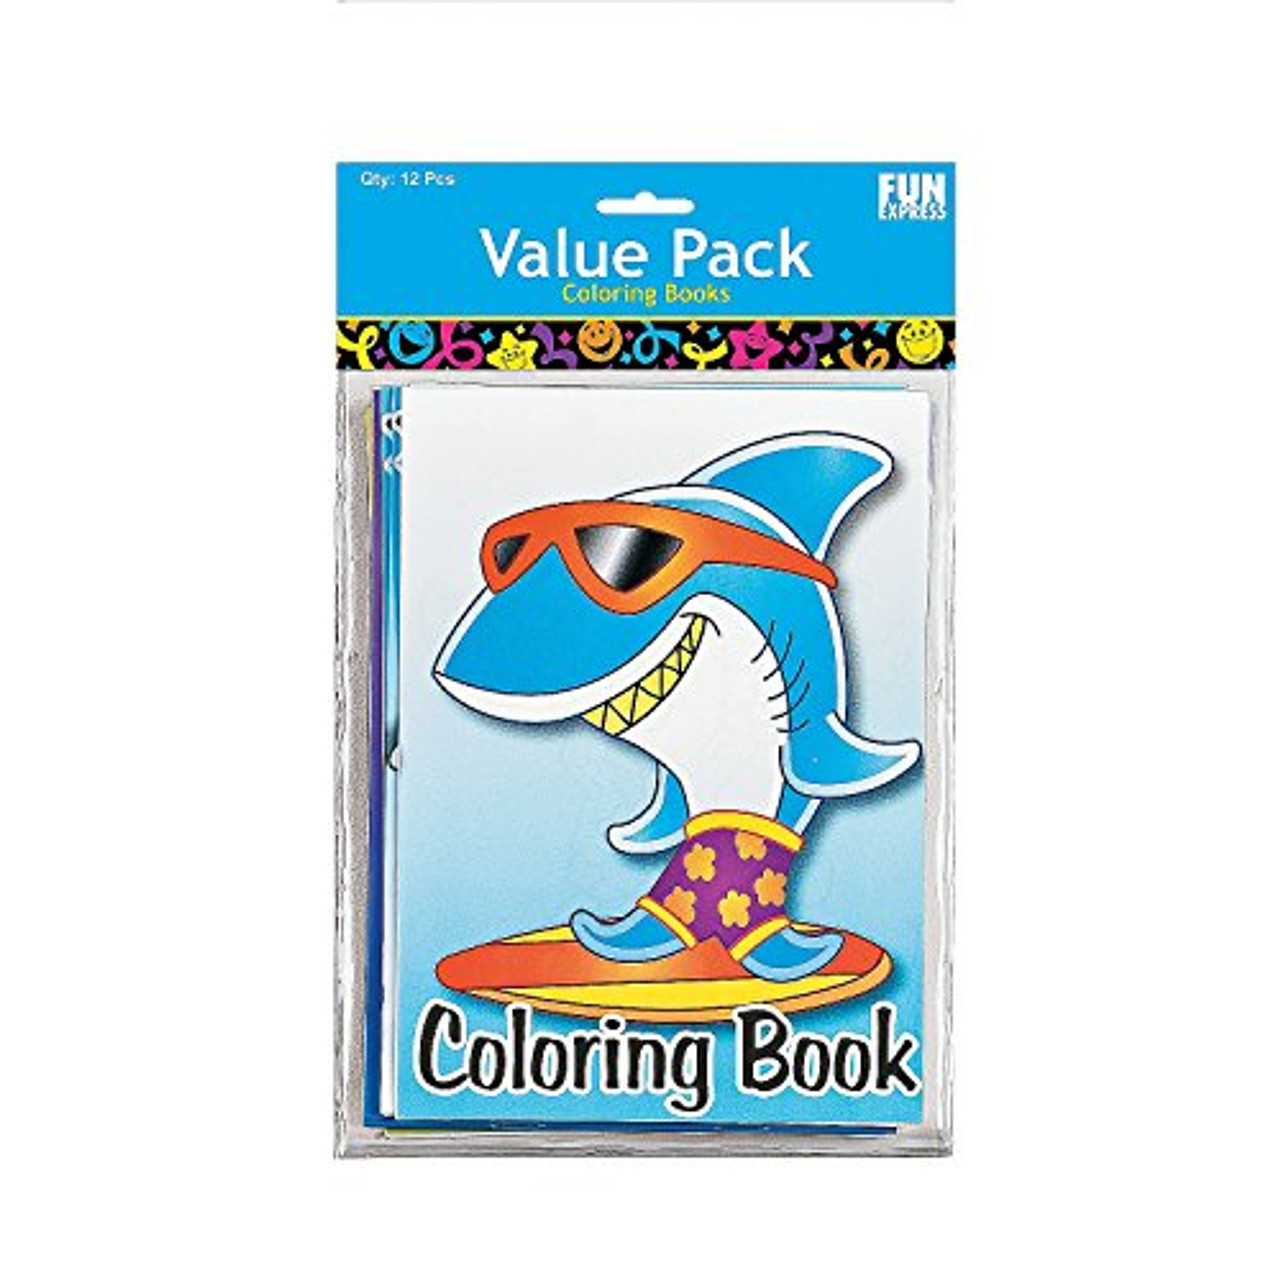 72-pack of Kid's Coloring Books ~ Great Party Favors! Assorted Designs